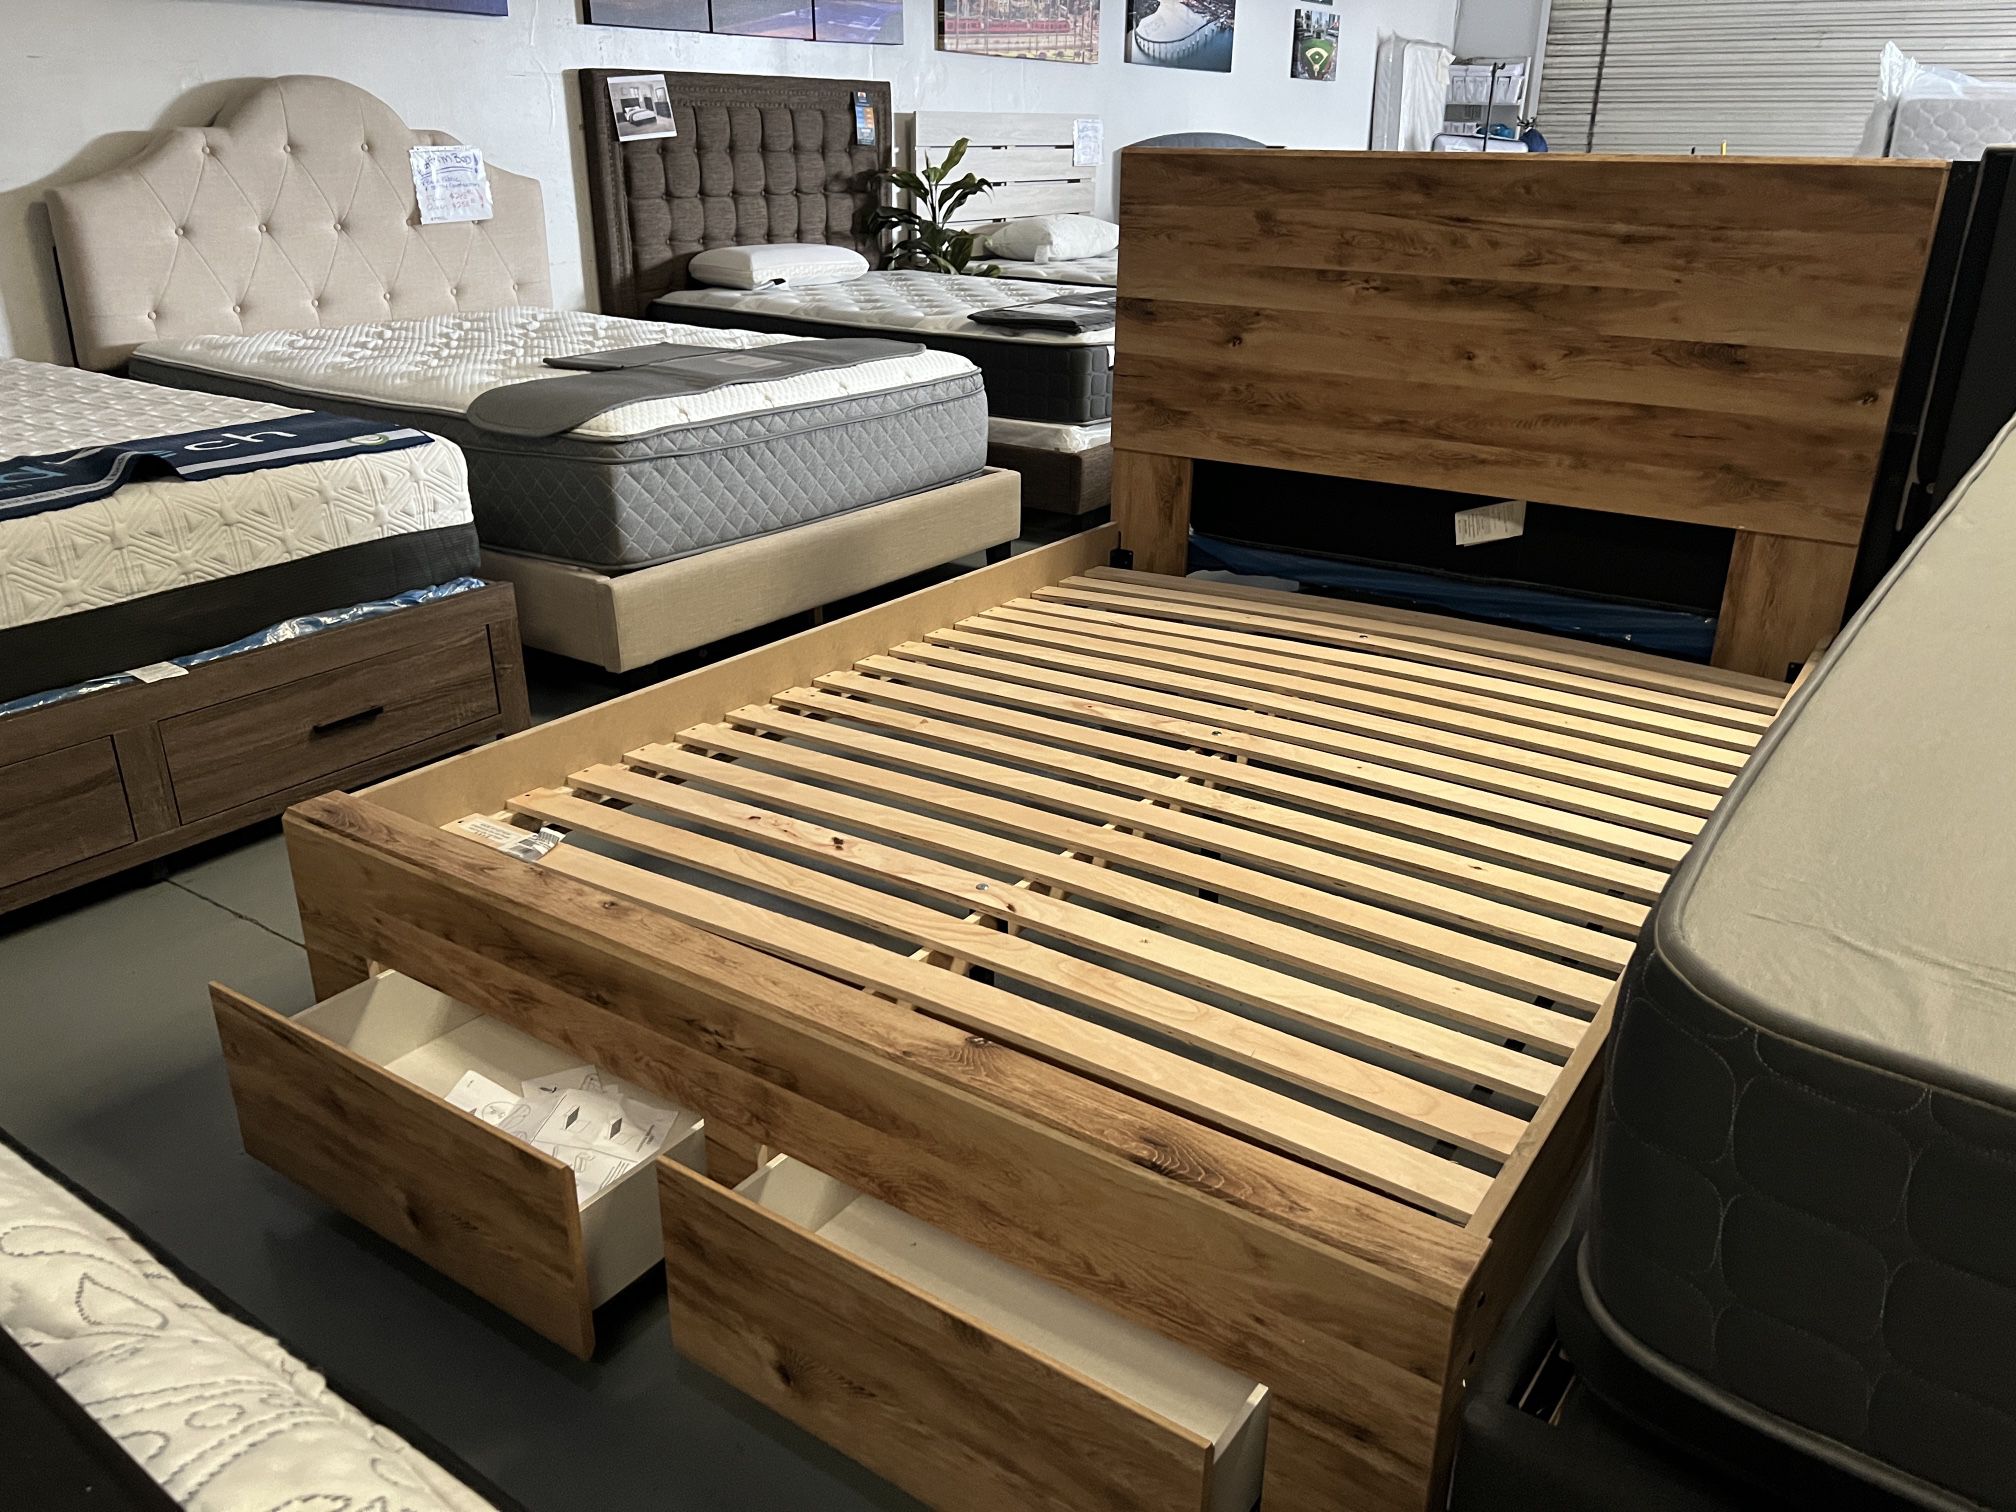 Ashley Furniture new platform bed frame with Storage Drawers! King $488 Queen $388